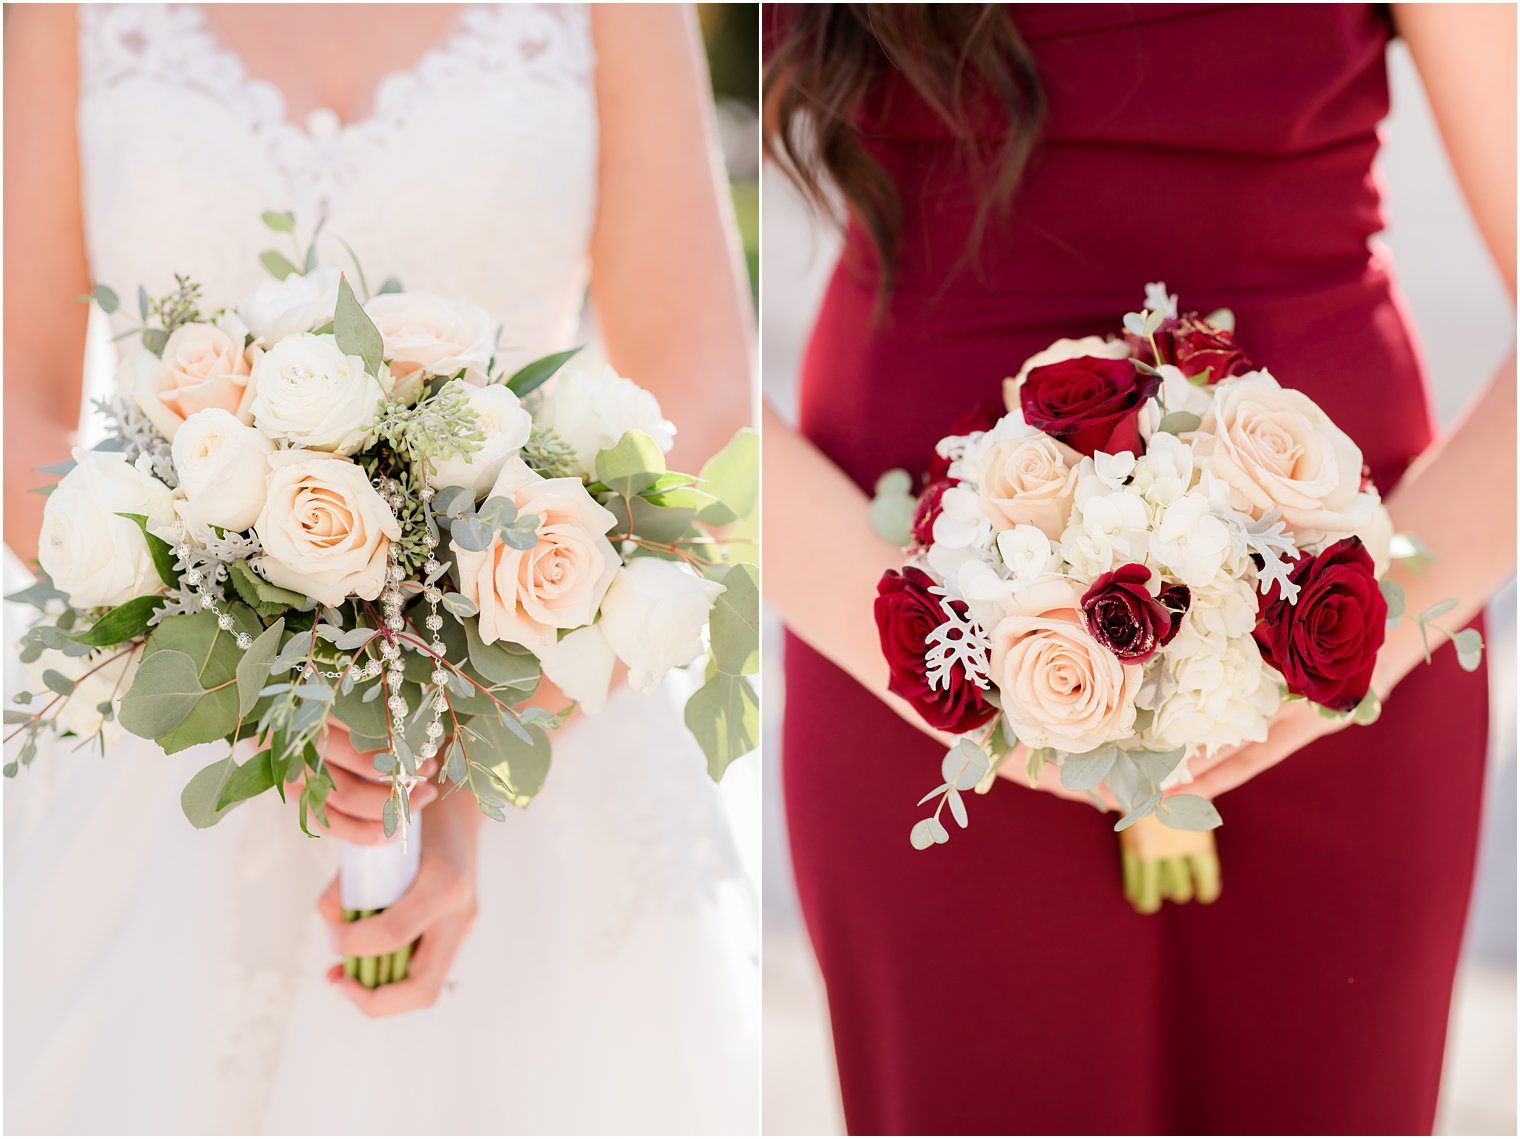 Bride and bridesmaid bouquet by Dees Florist